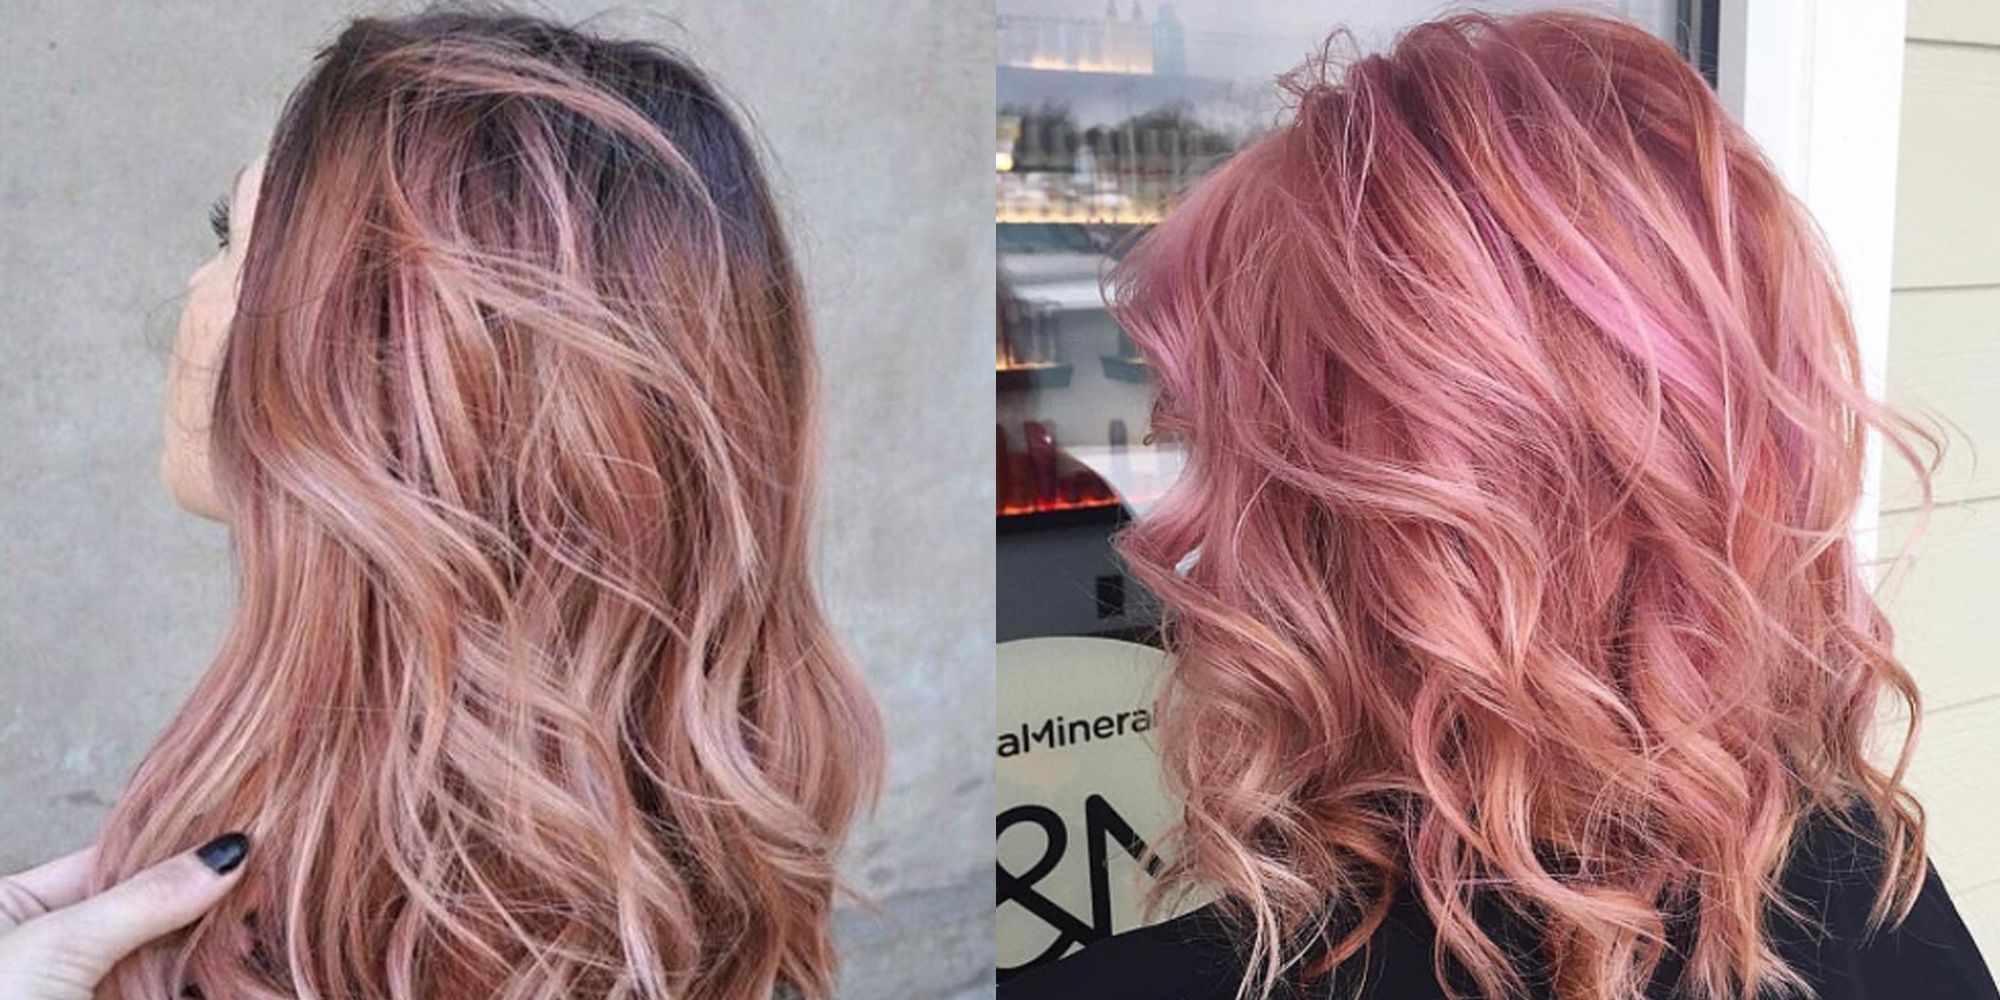 Rose Gold Hair Is The Latest Hair Color Trend - 12 Pink Hair Shades